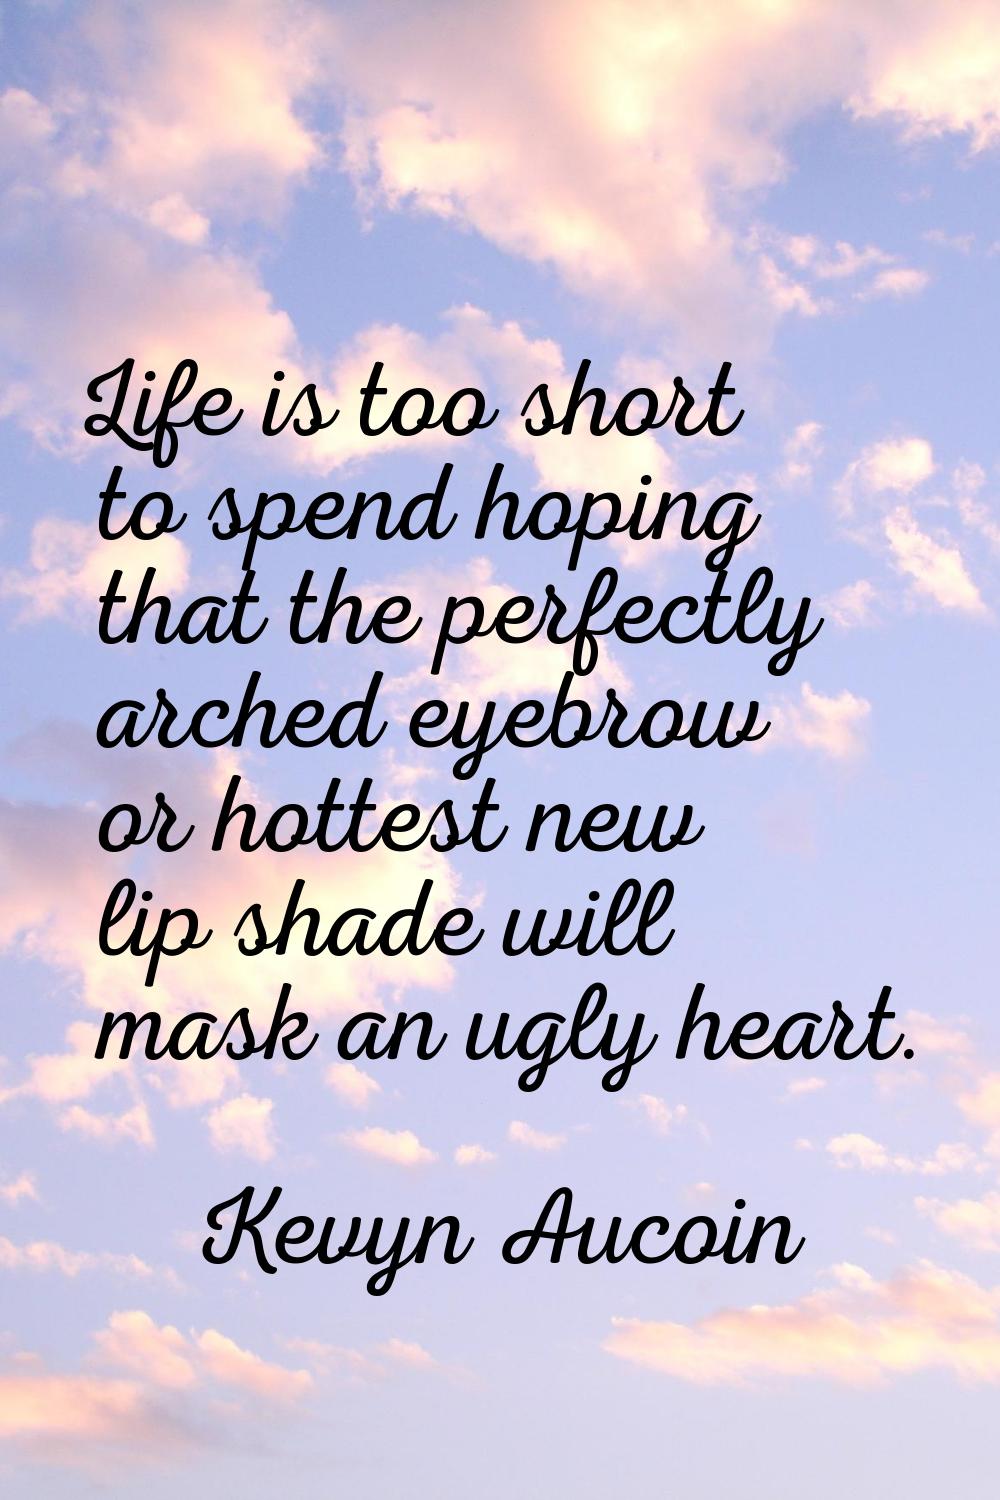 Life is too short to spend hoping that the perfectly arched eyebrow or hottest new lip shade will m